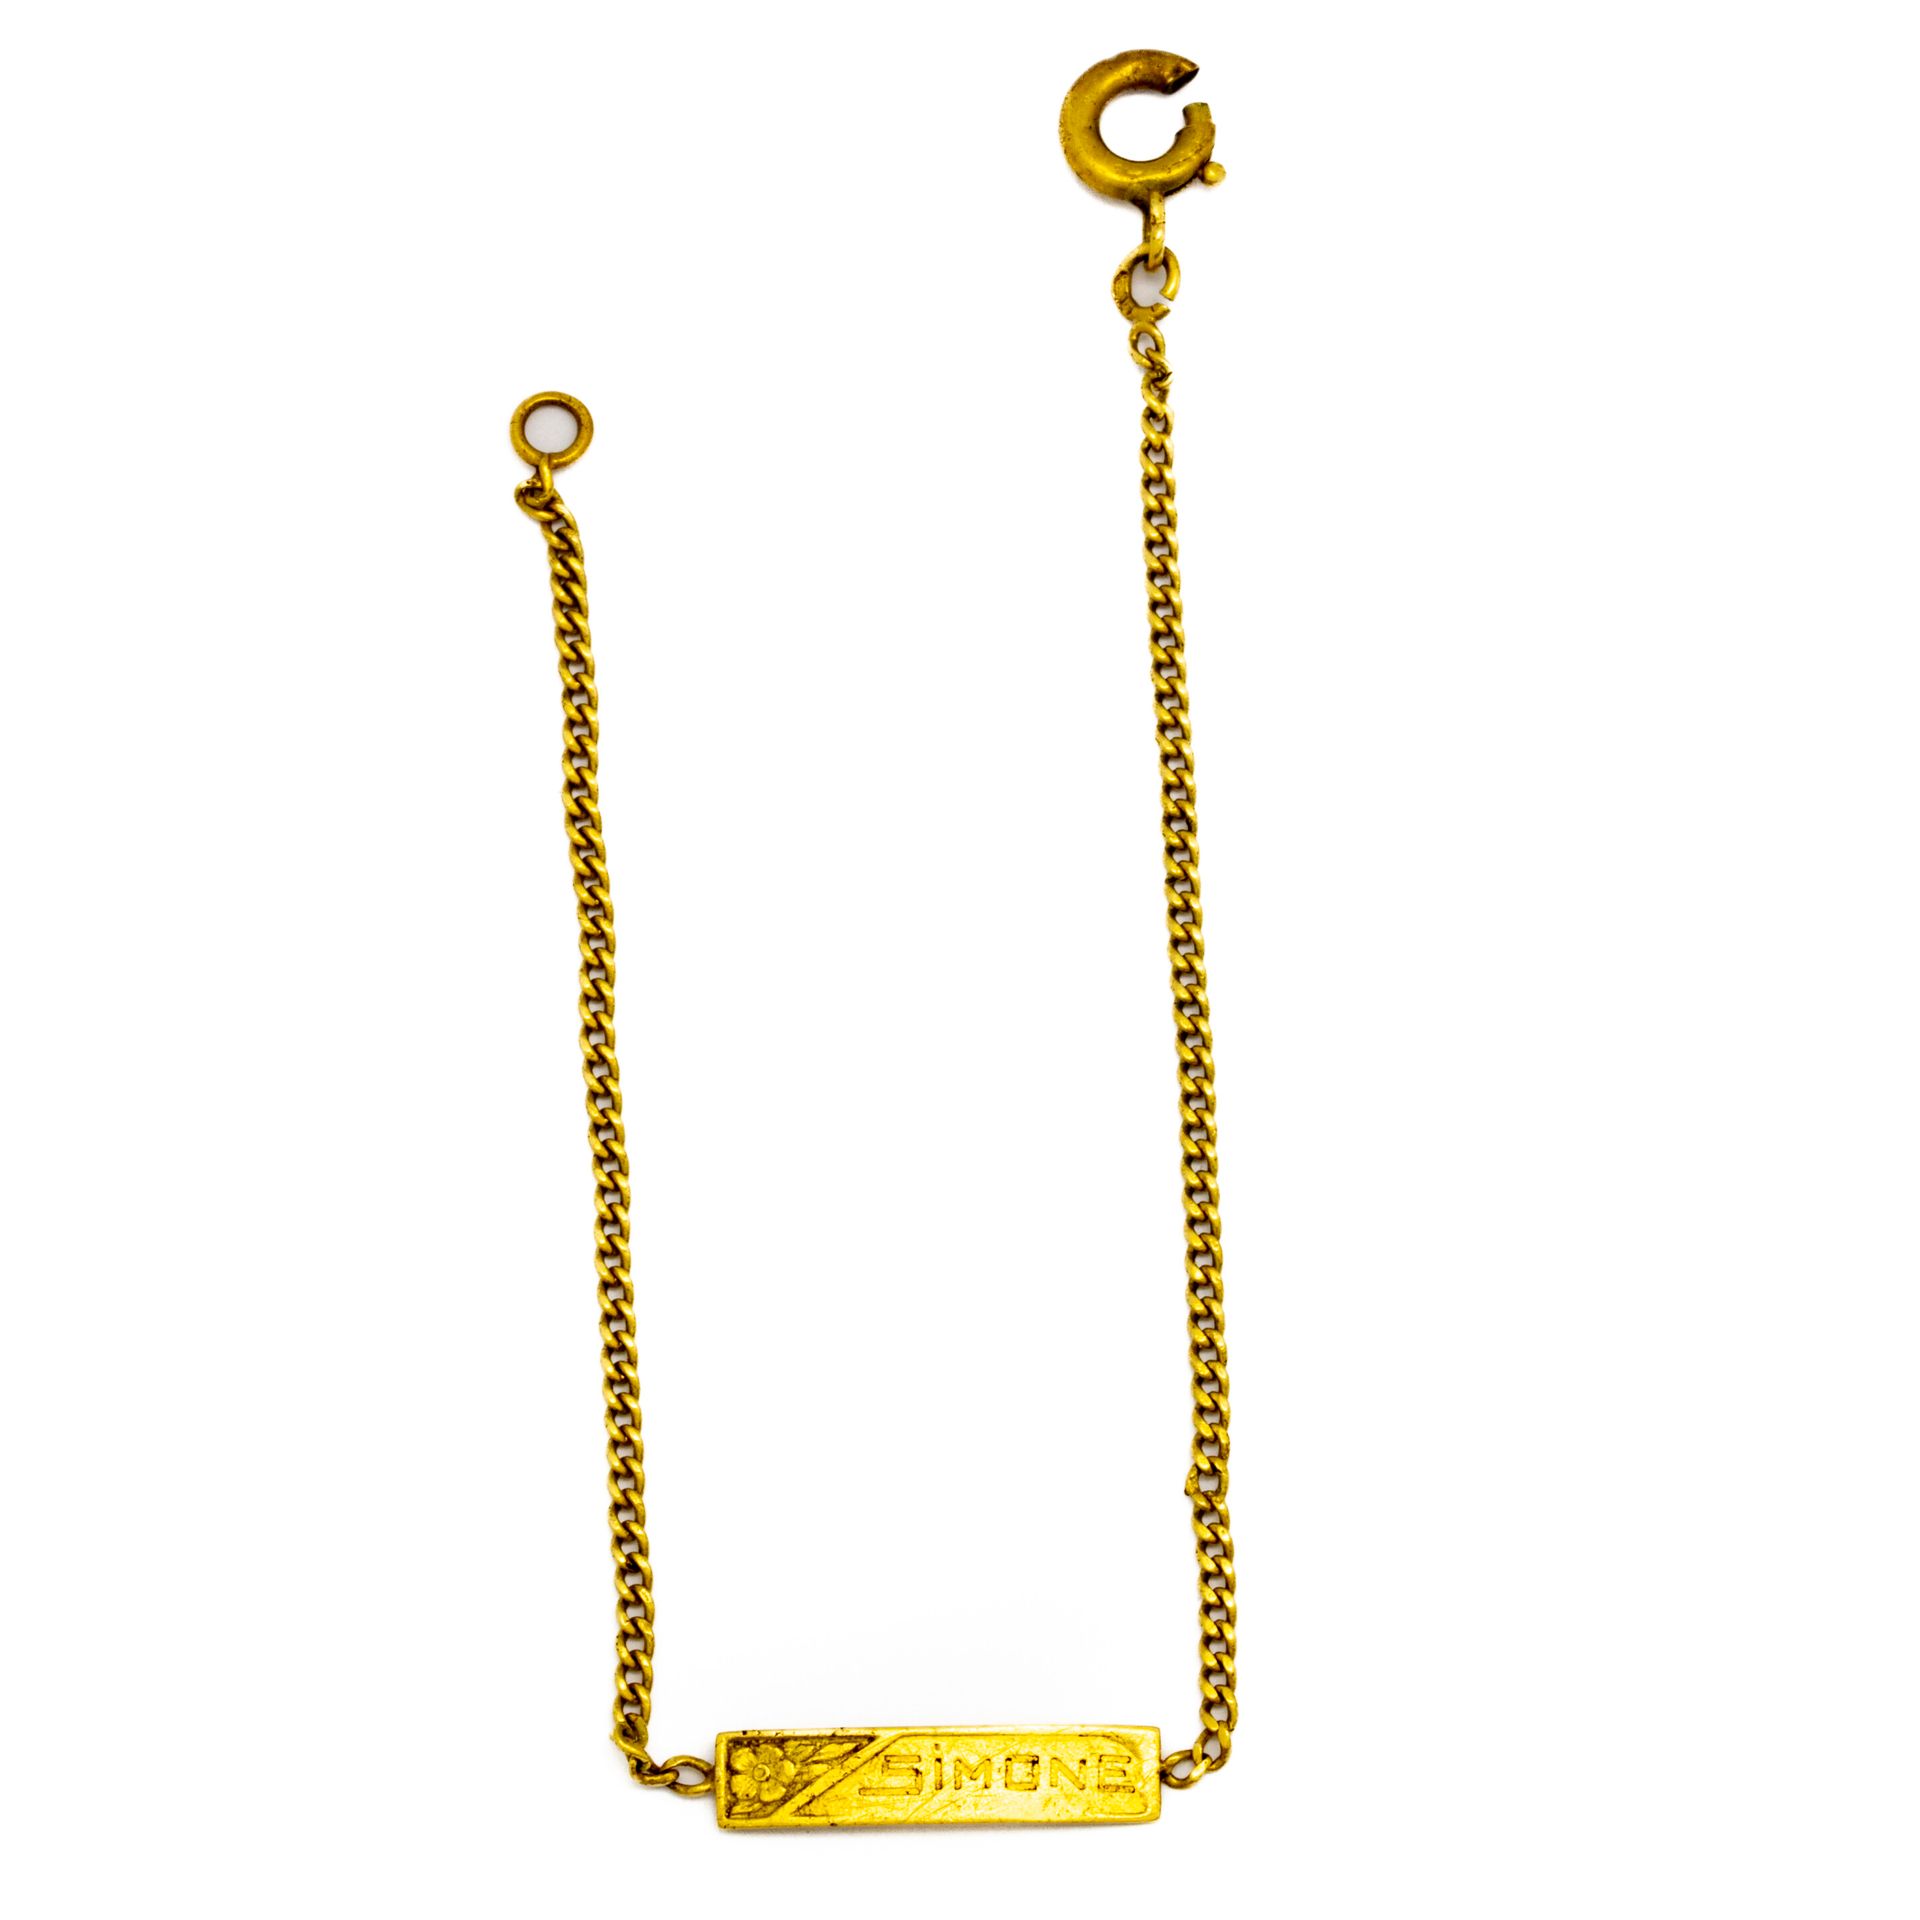 Null Small bracelet in yellow gold engraved Simone
Weight : 2 g.